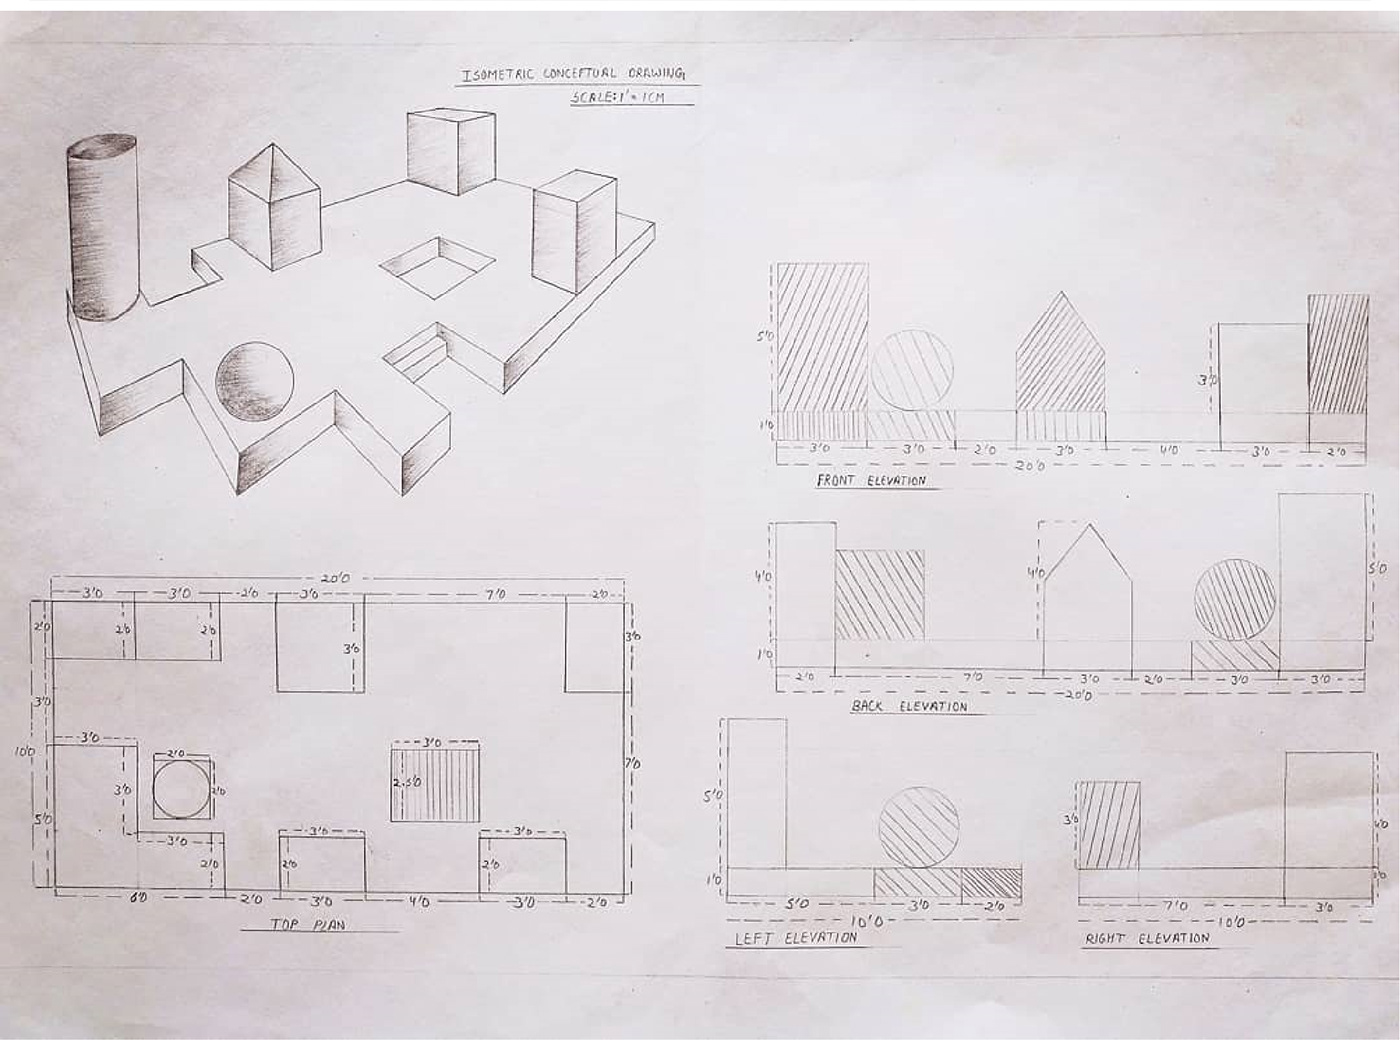 Isometric Conceptual Drawing